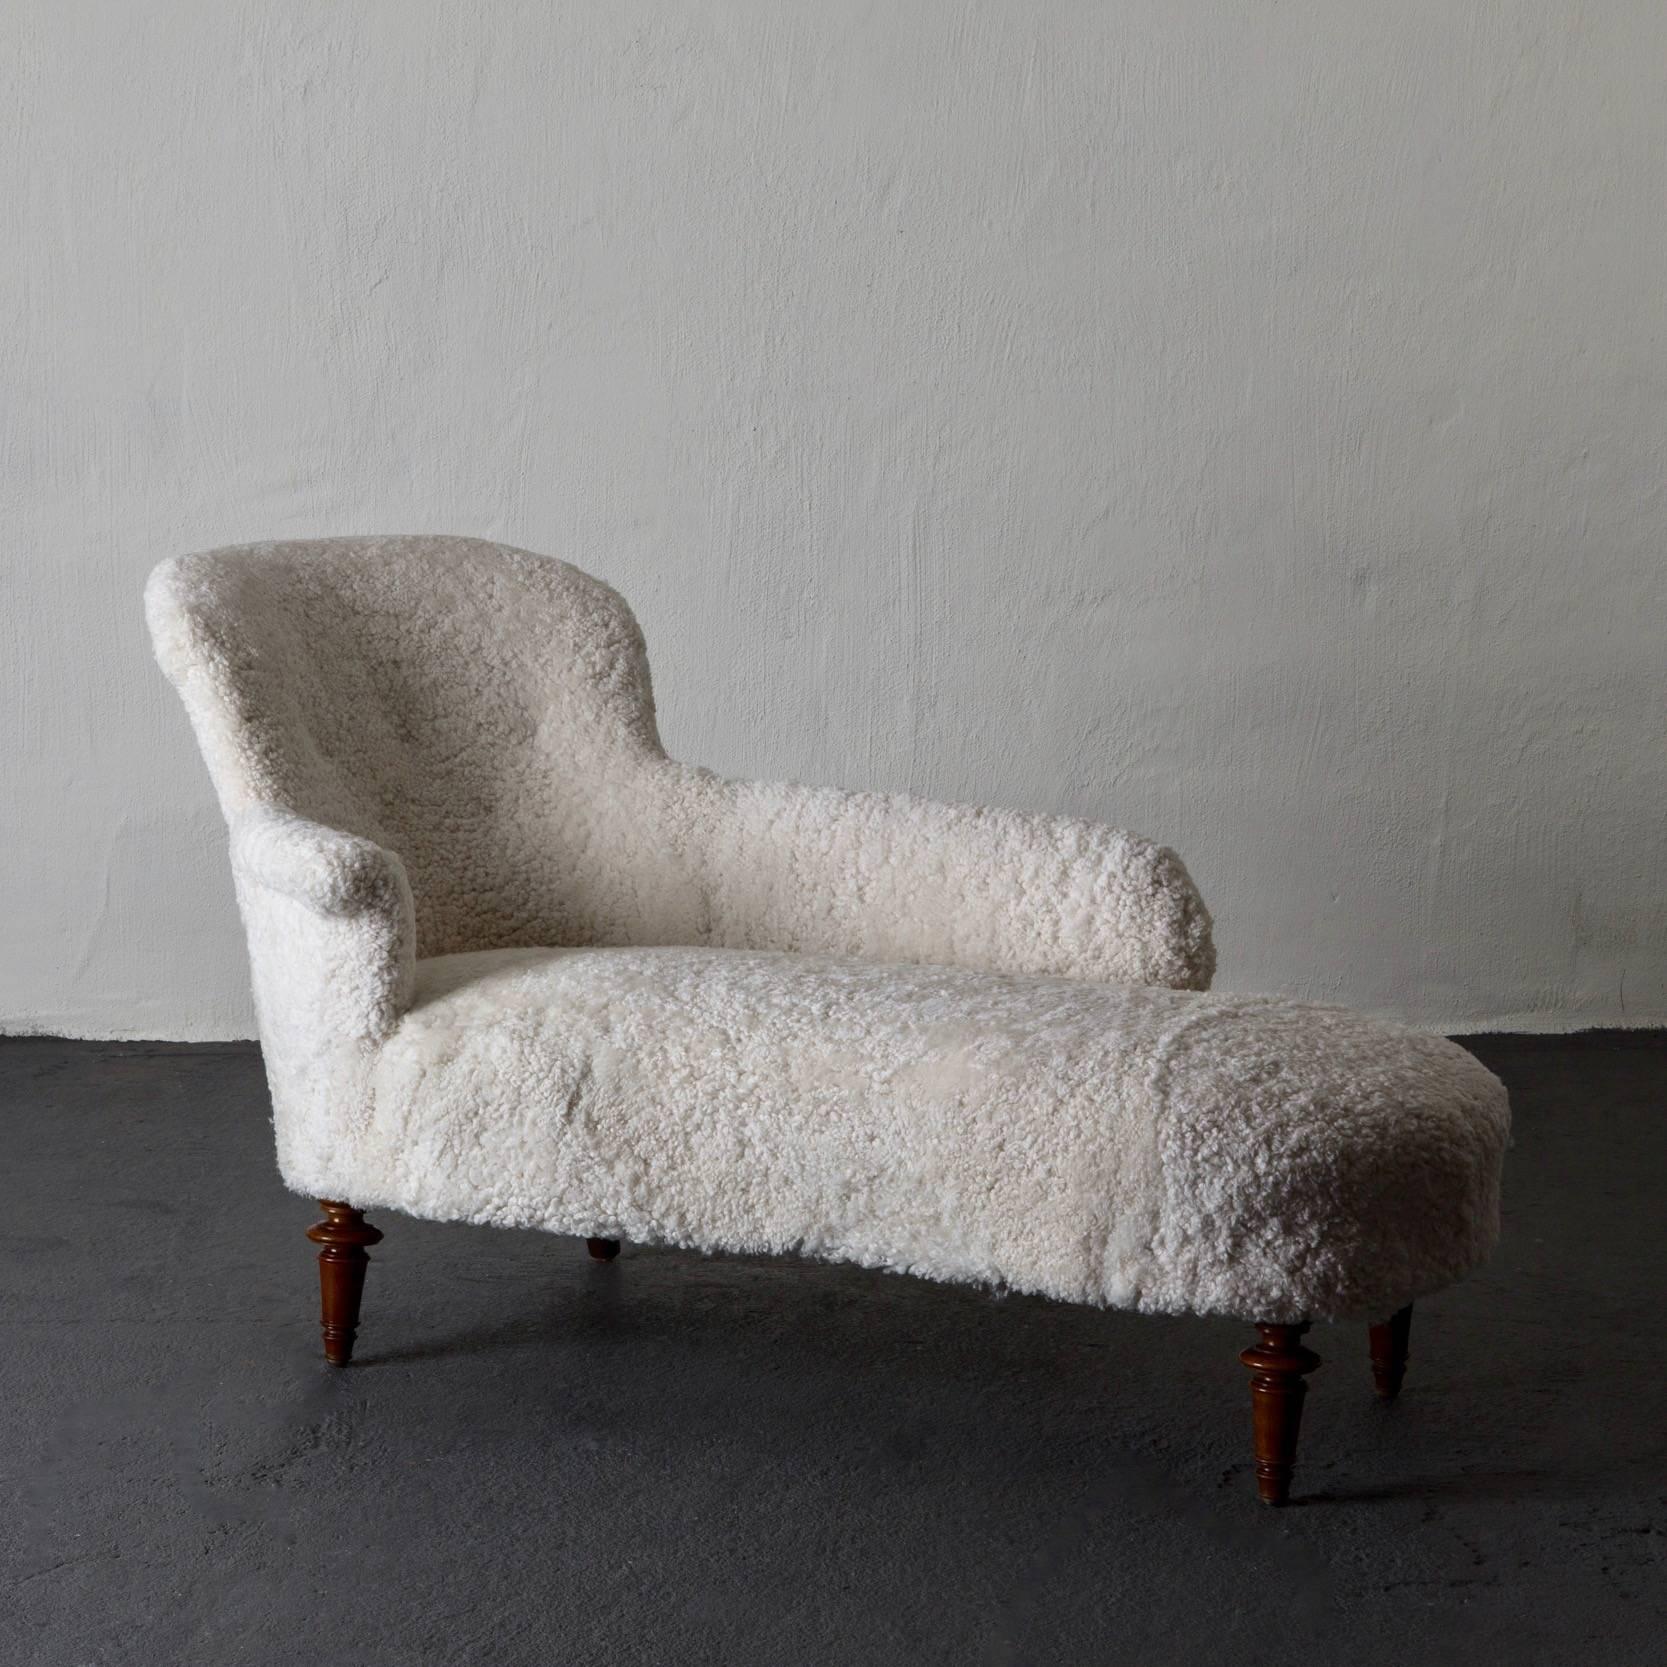 Daybed Swedish 20th century modern sheepskin white, Sweden. A daybed made during the 20th century in Sweden. Upholstered in white sheepskin. Measure: Height of armrest 23.6 inches.